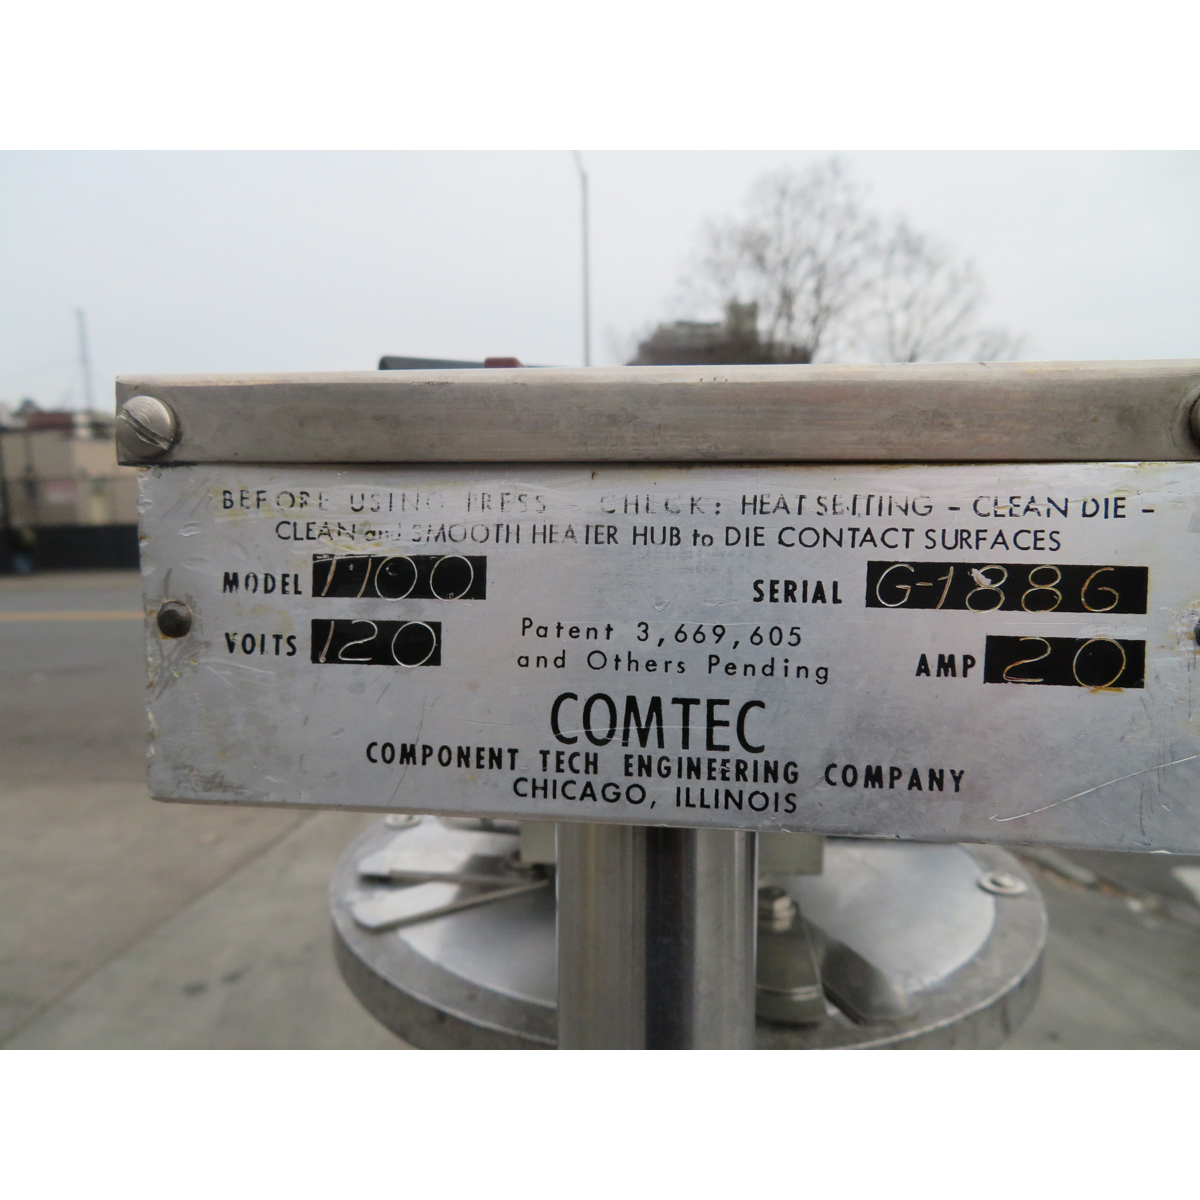 Comtec 1100 7" Pan Pie Crust Forming Press, Used Excellent Condition image 3